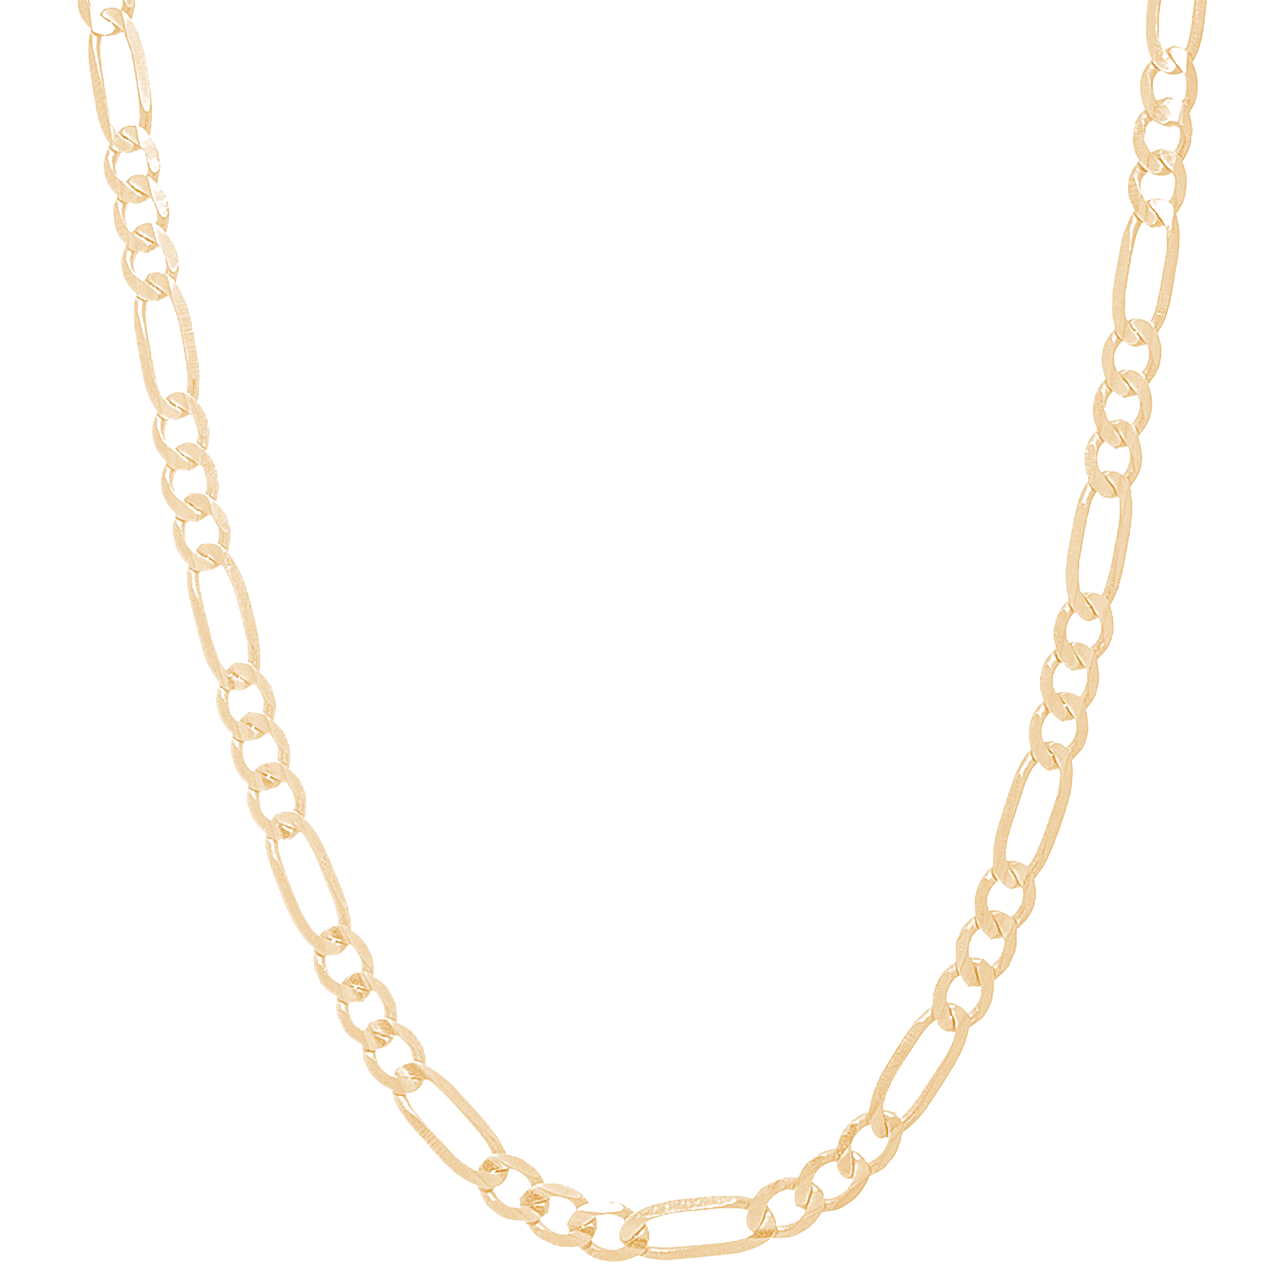 Solid Yellow Gold Figaro Chain - 14kt - 4mm - 24"